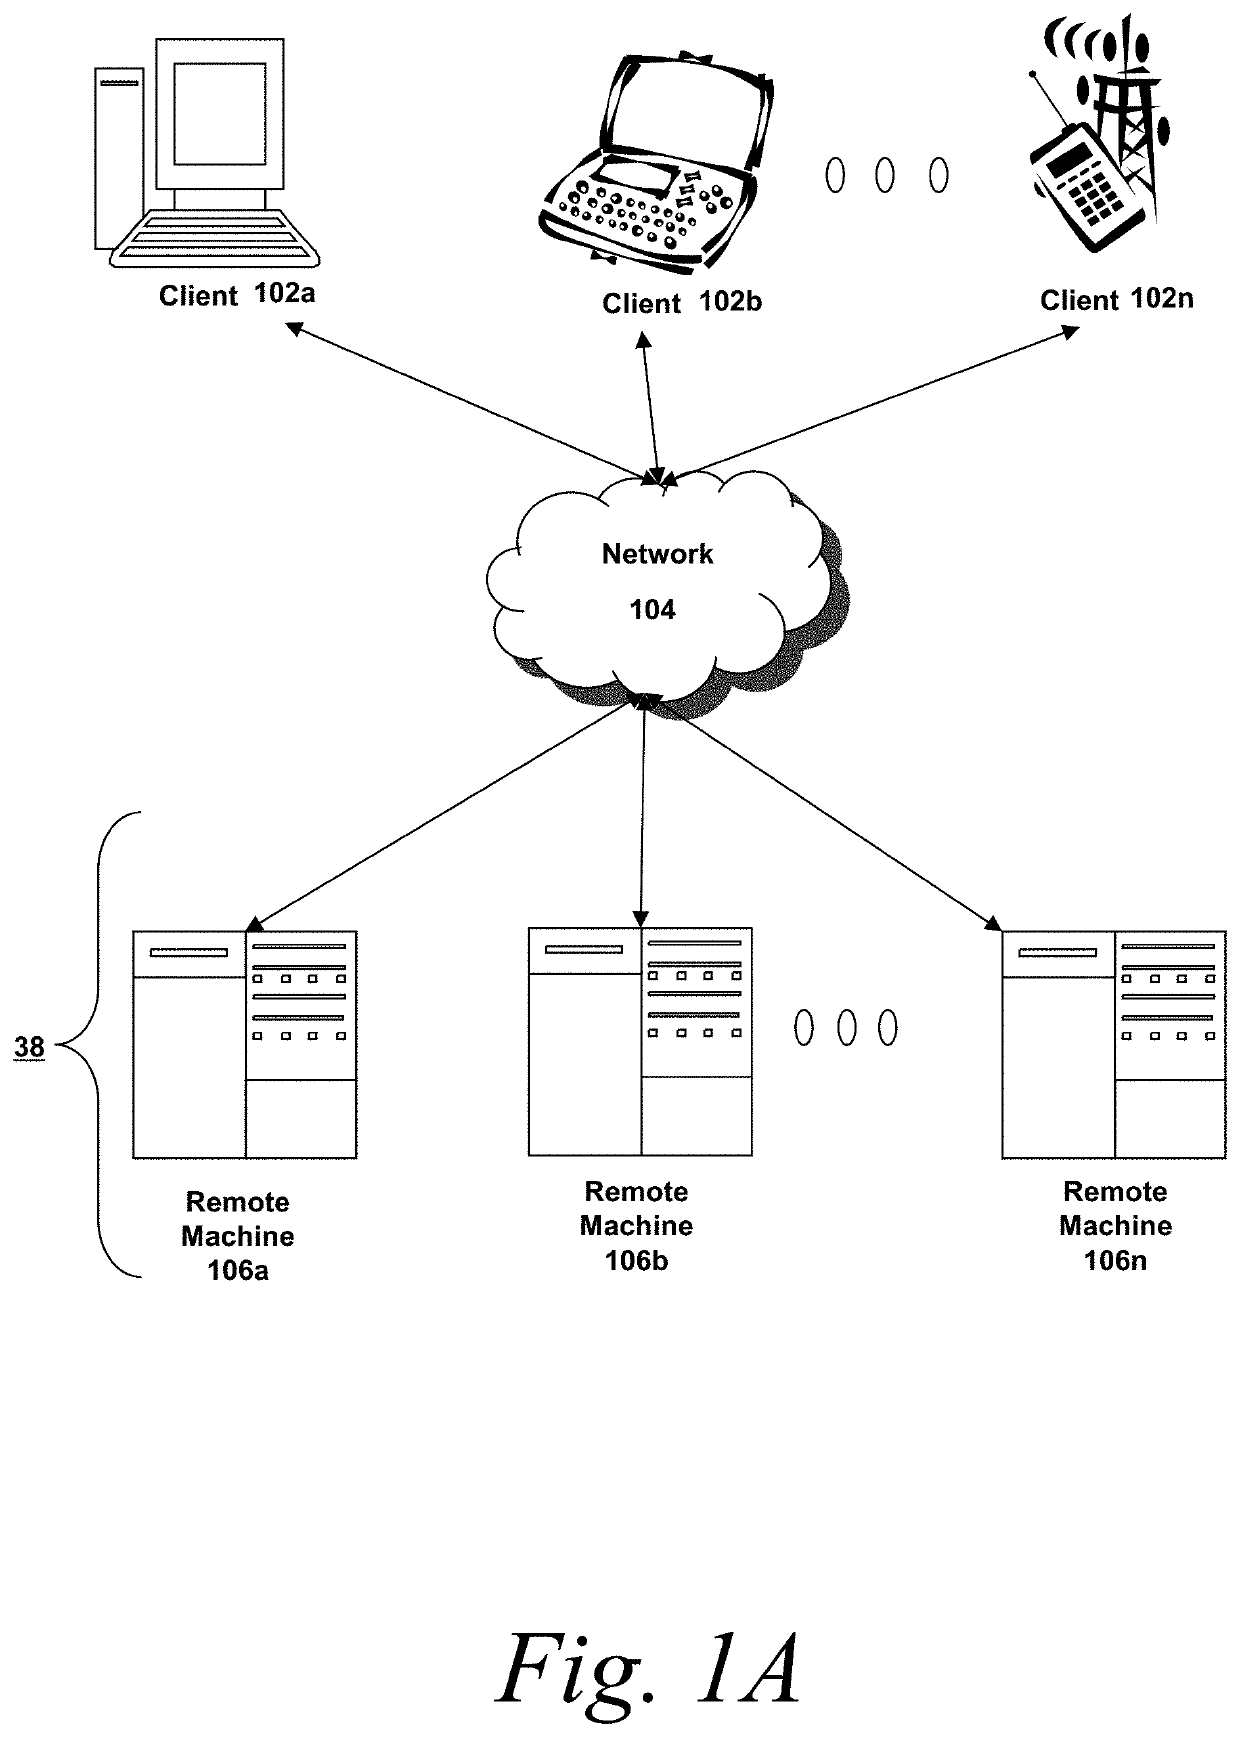 Methods and systems for analyzing speech during a call and automatically modifying, during the call, a call center referral interface